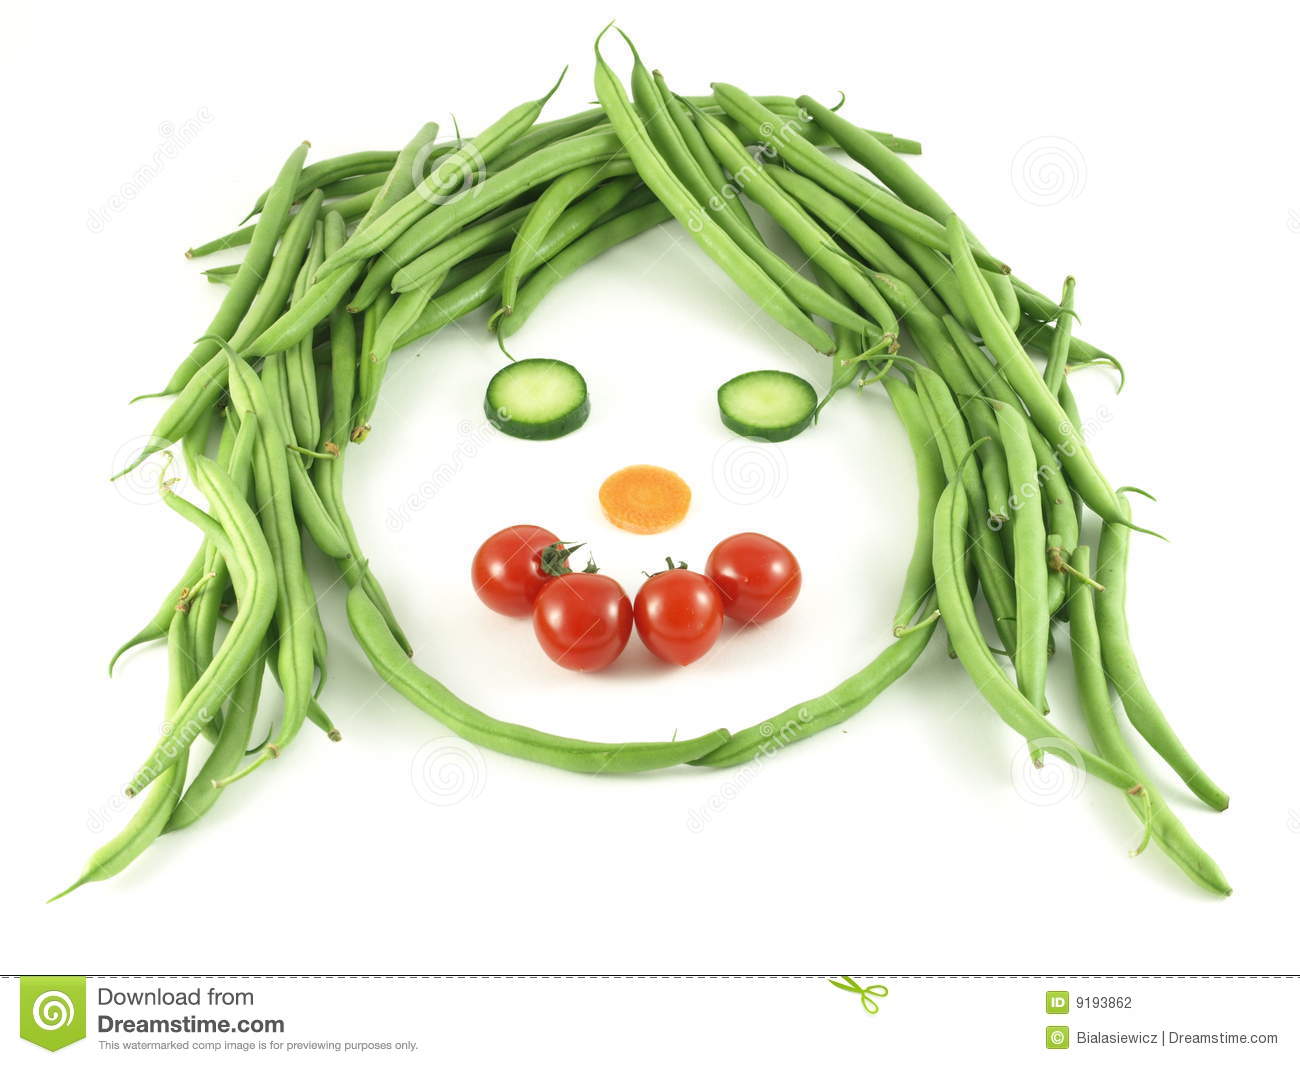 Vegetable Funny Smiley Face Image